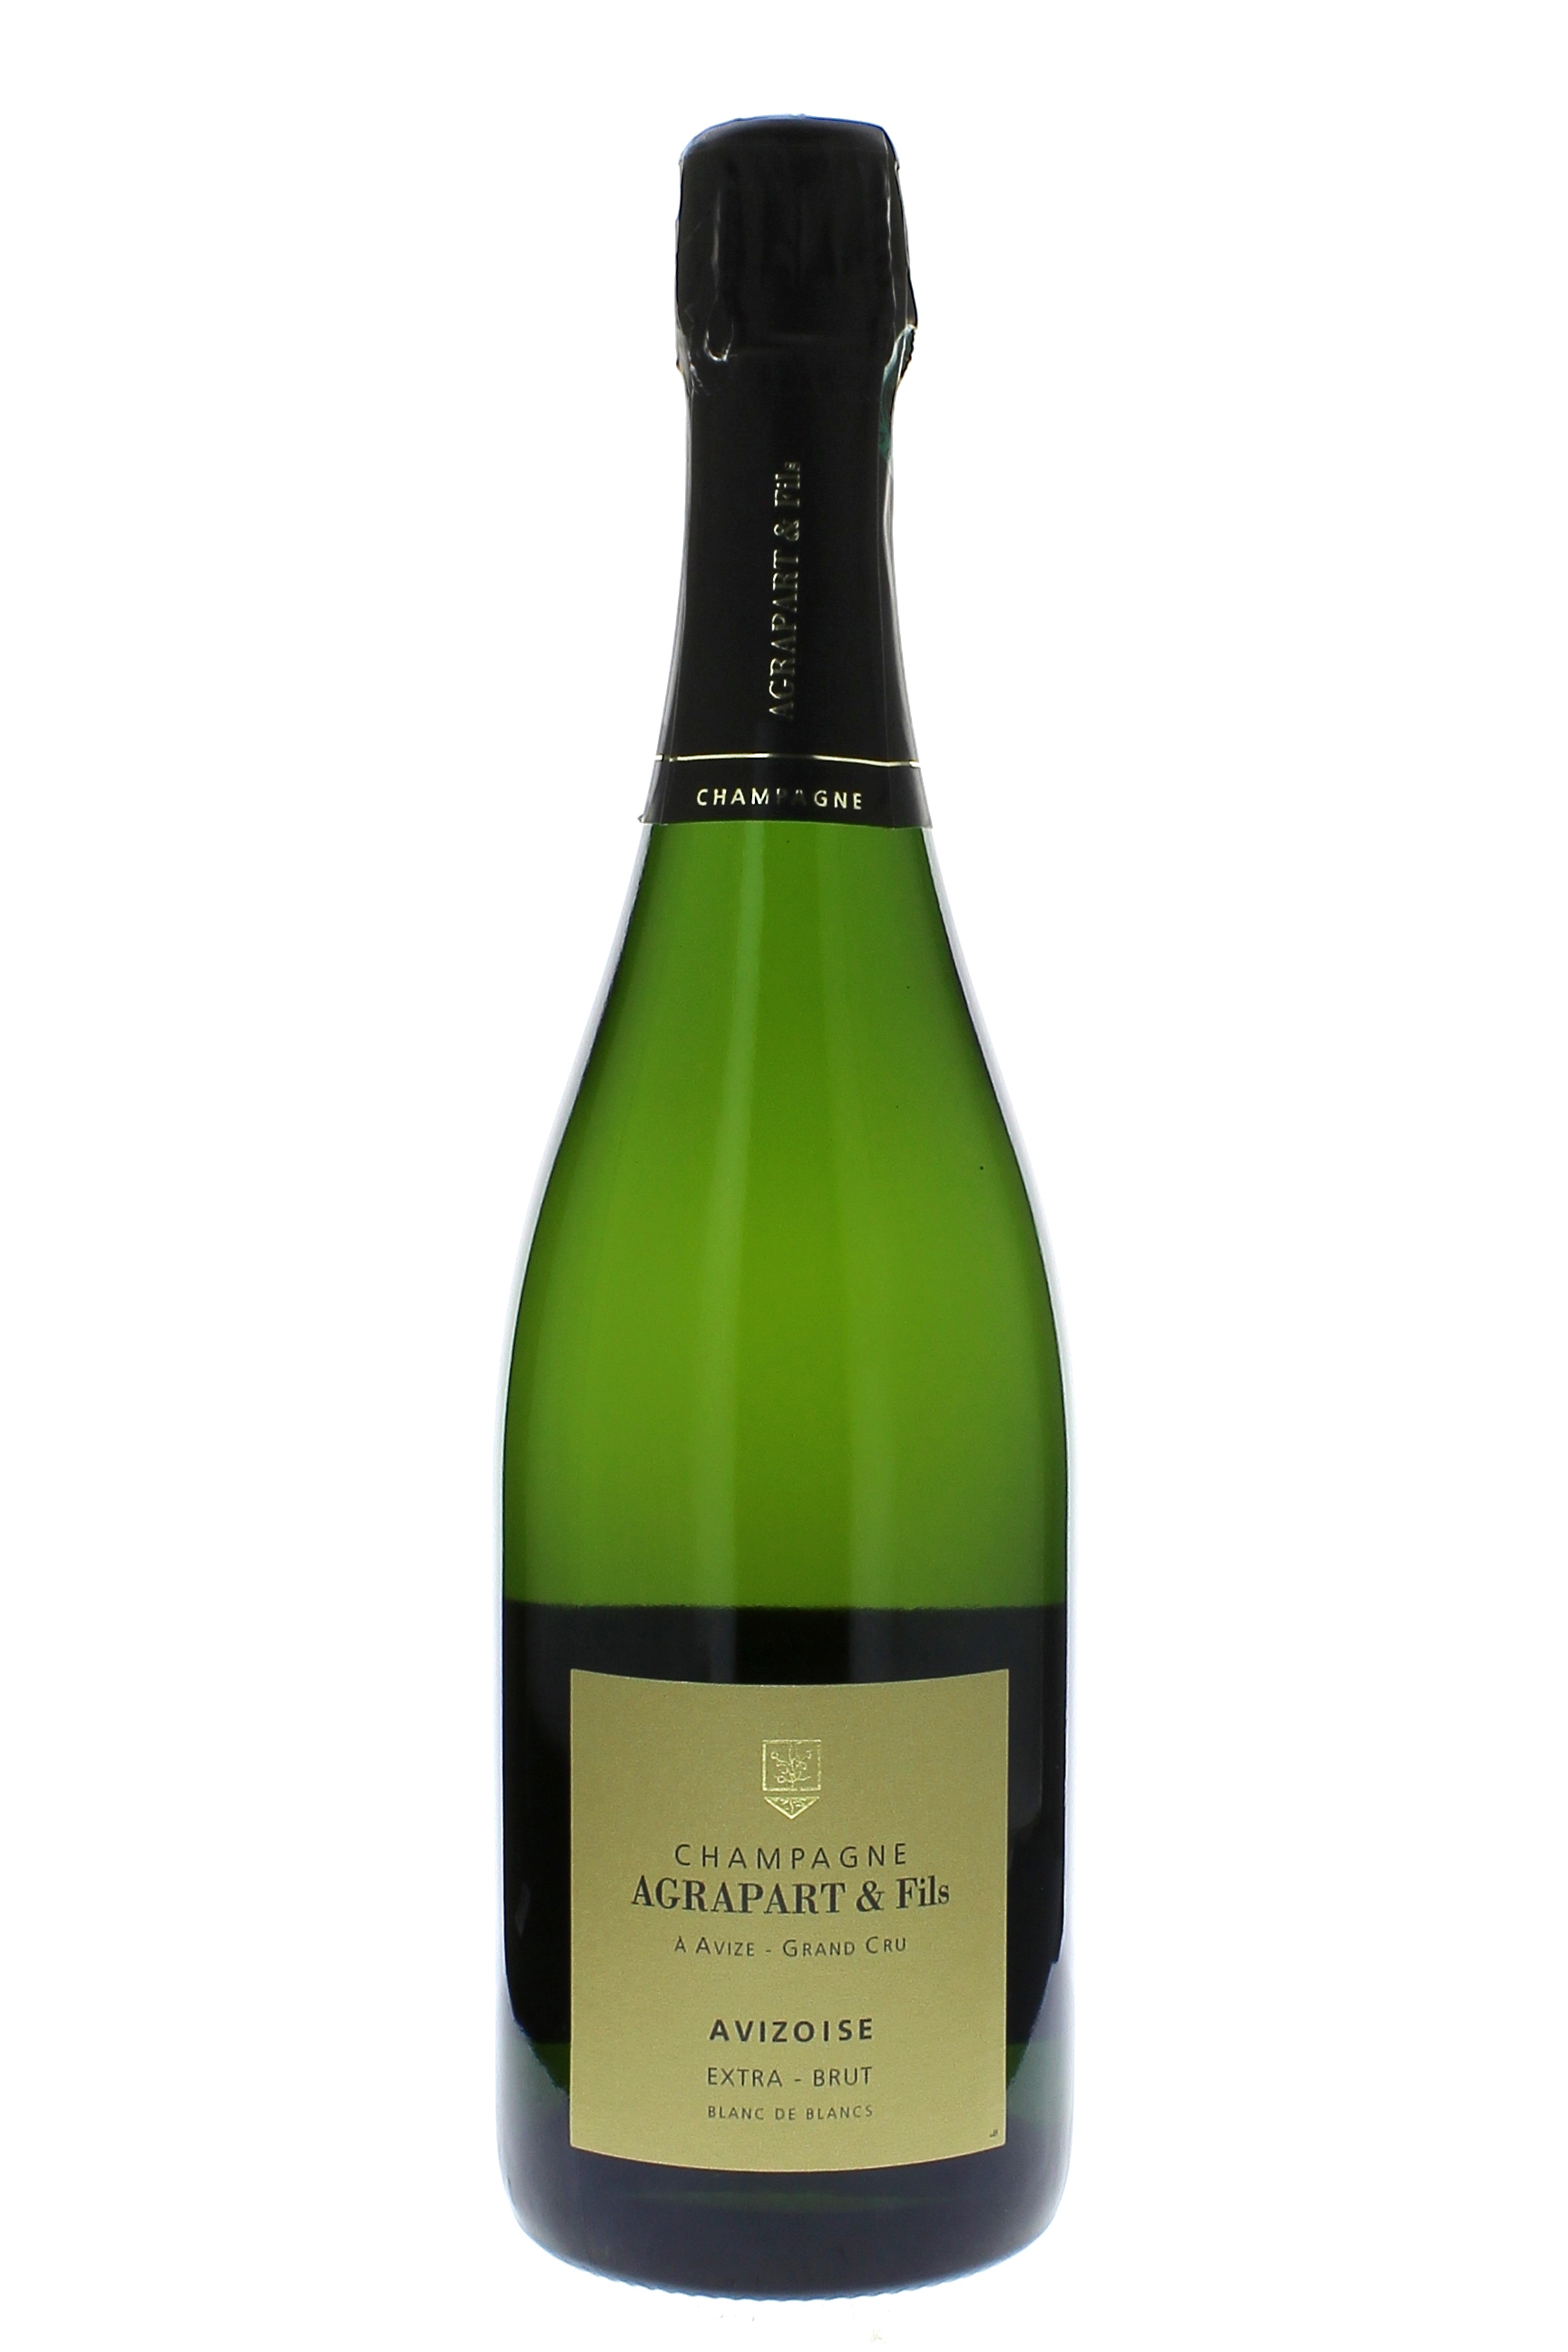 Agrapart  avizoise 2011  Champagne, Agrapart